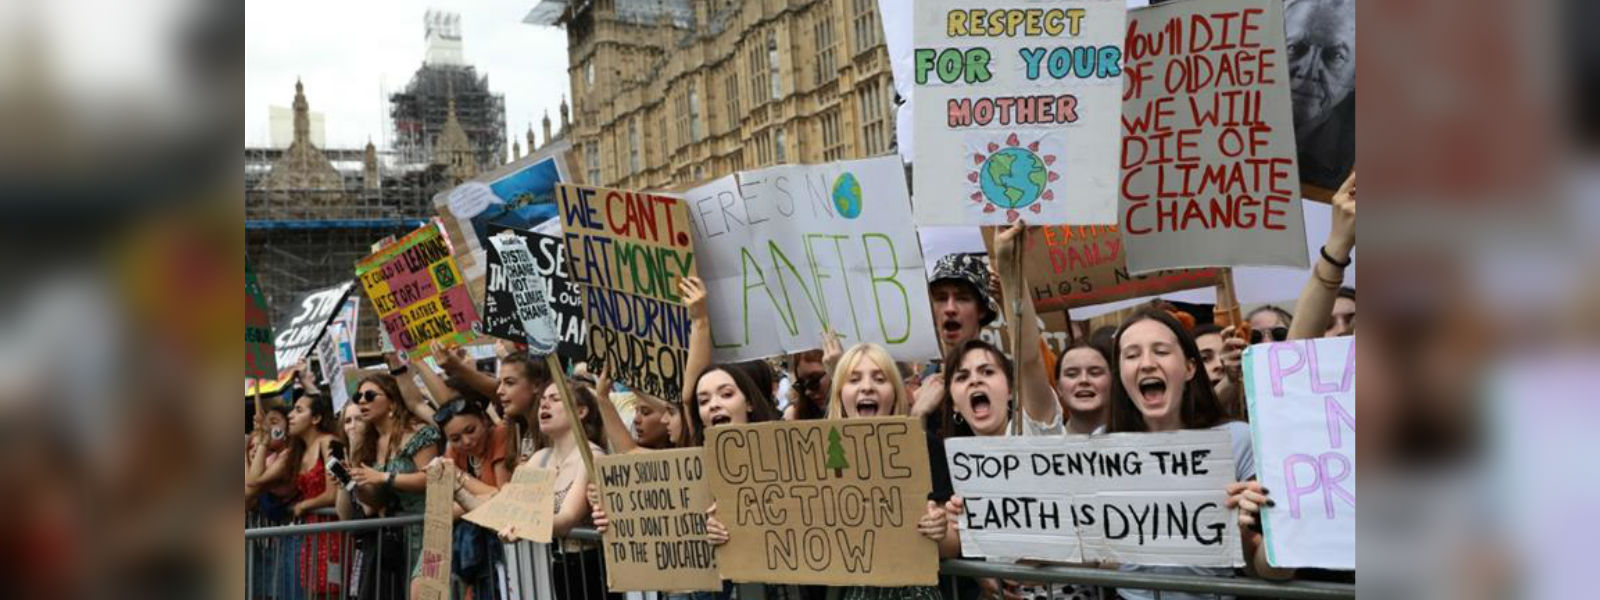 The Global Climate strike launched by youth calls government attention on climate change